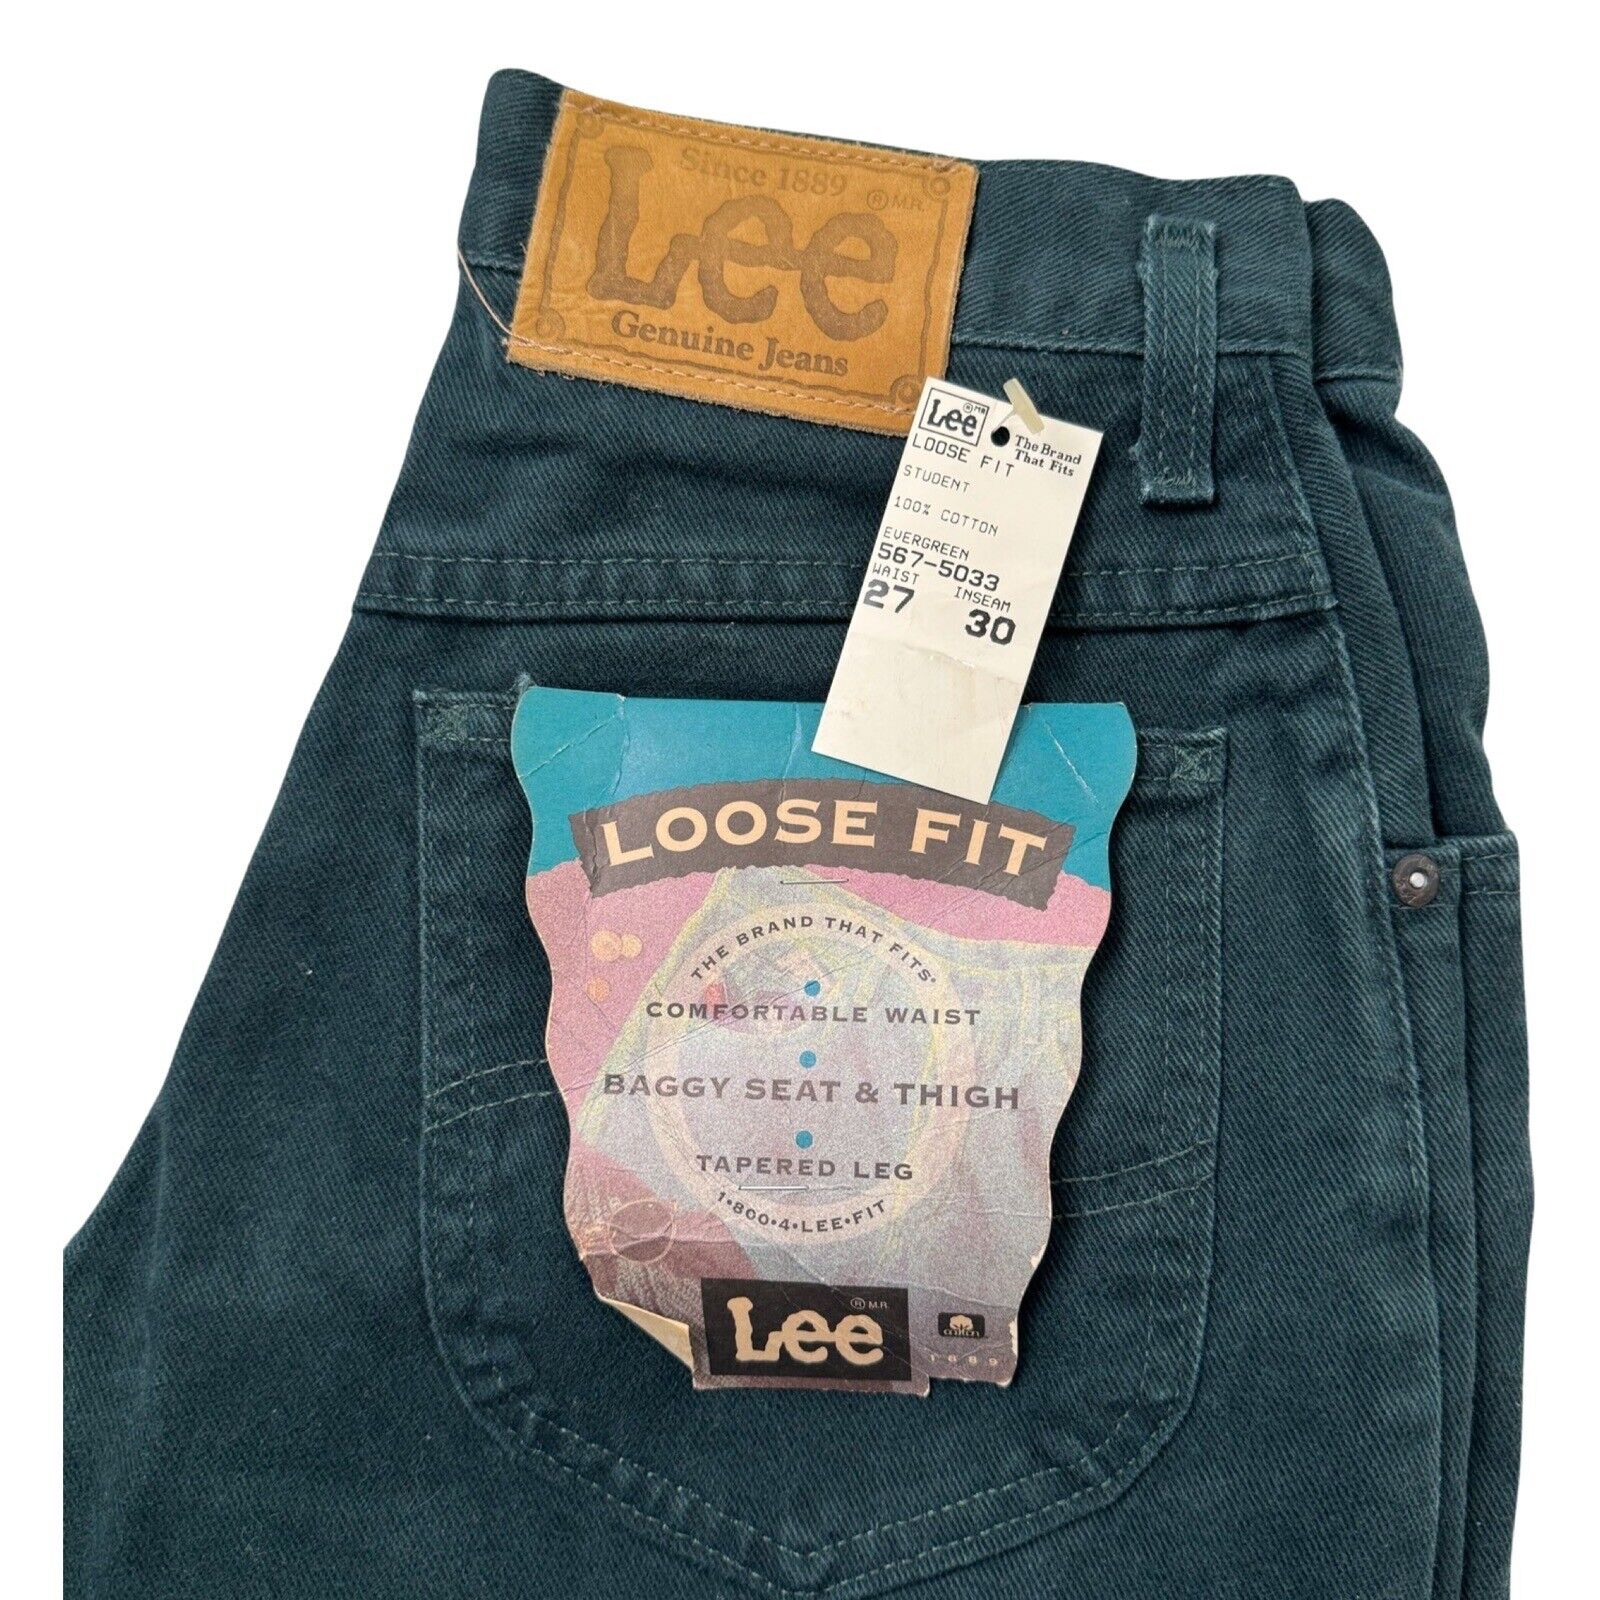 New With Tags Vintage Lee Jeans Men 27x30 Green Loose Fit Straight Leg USA